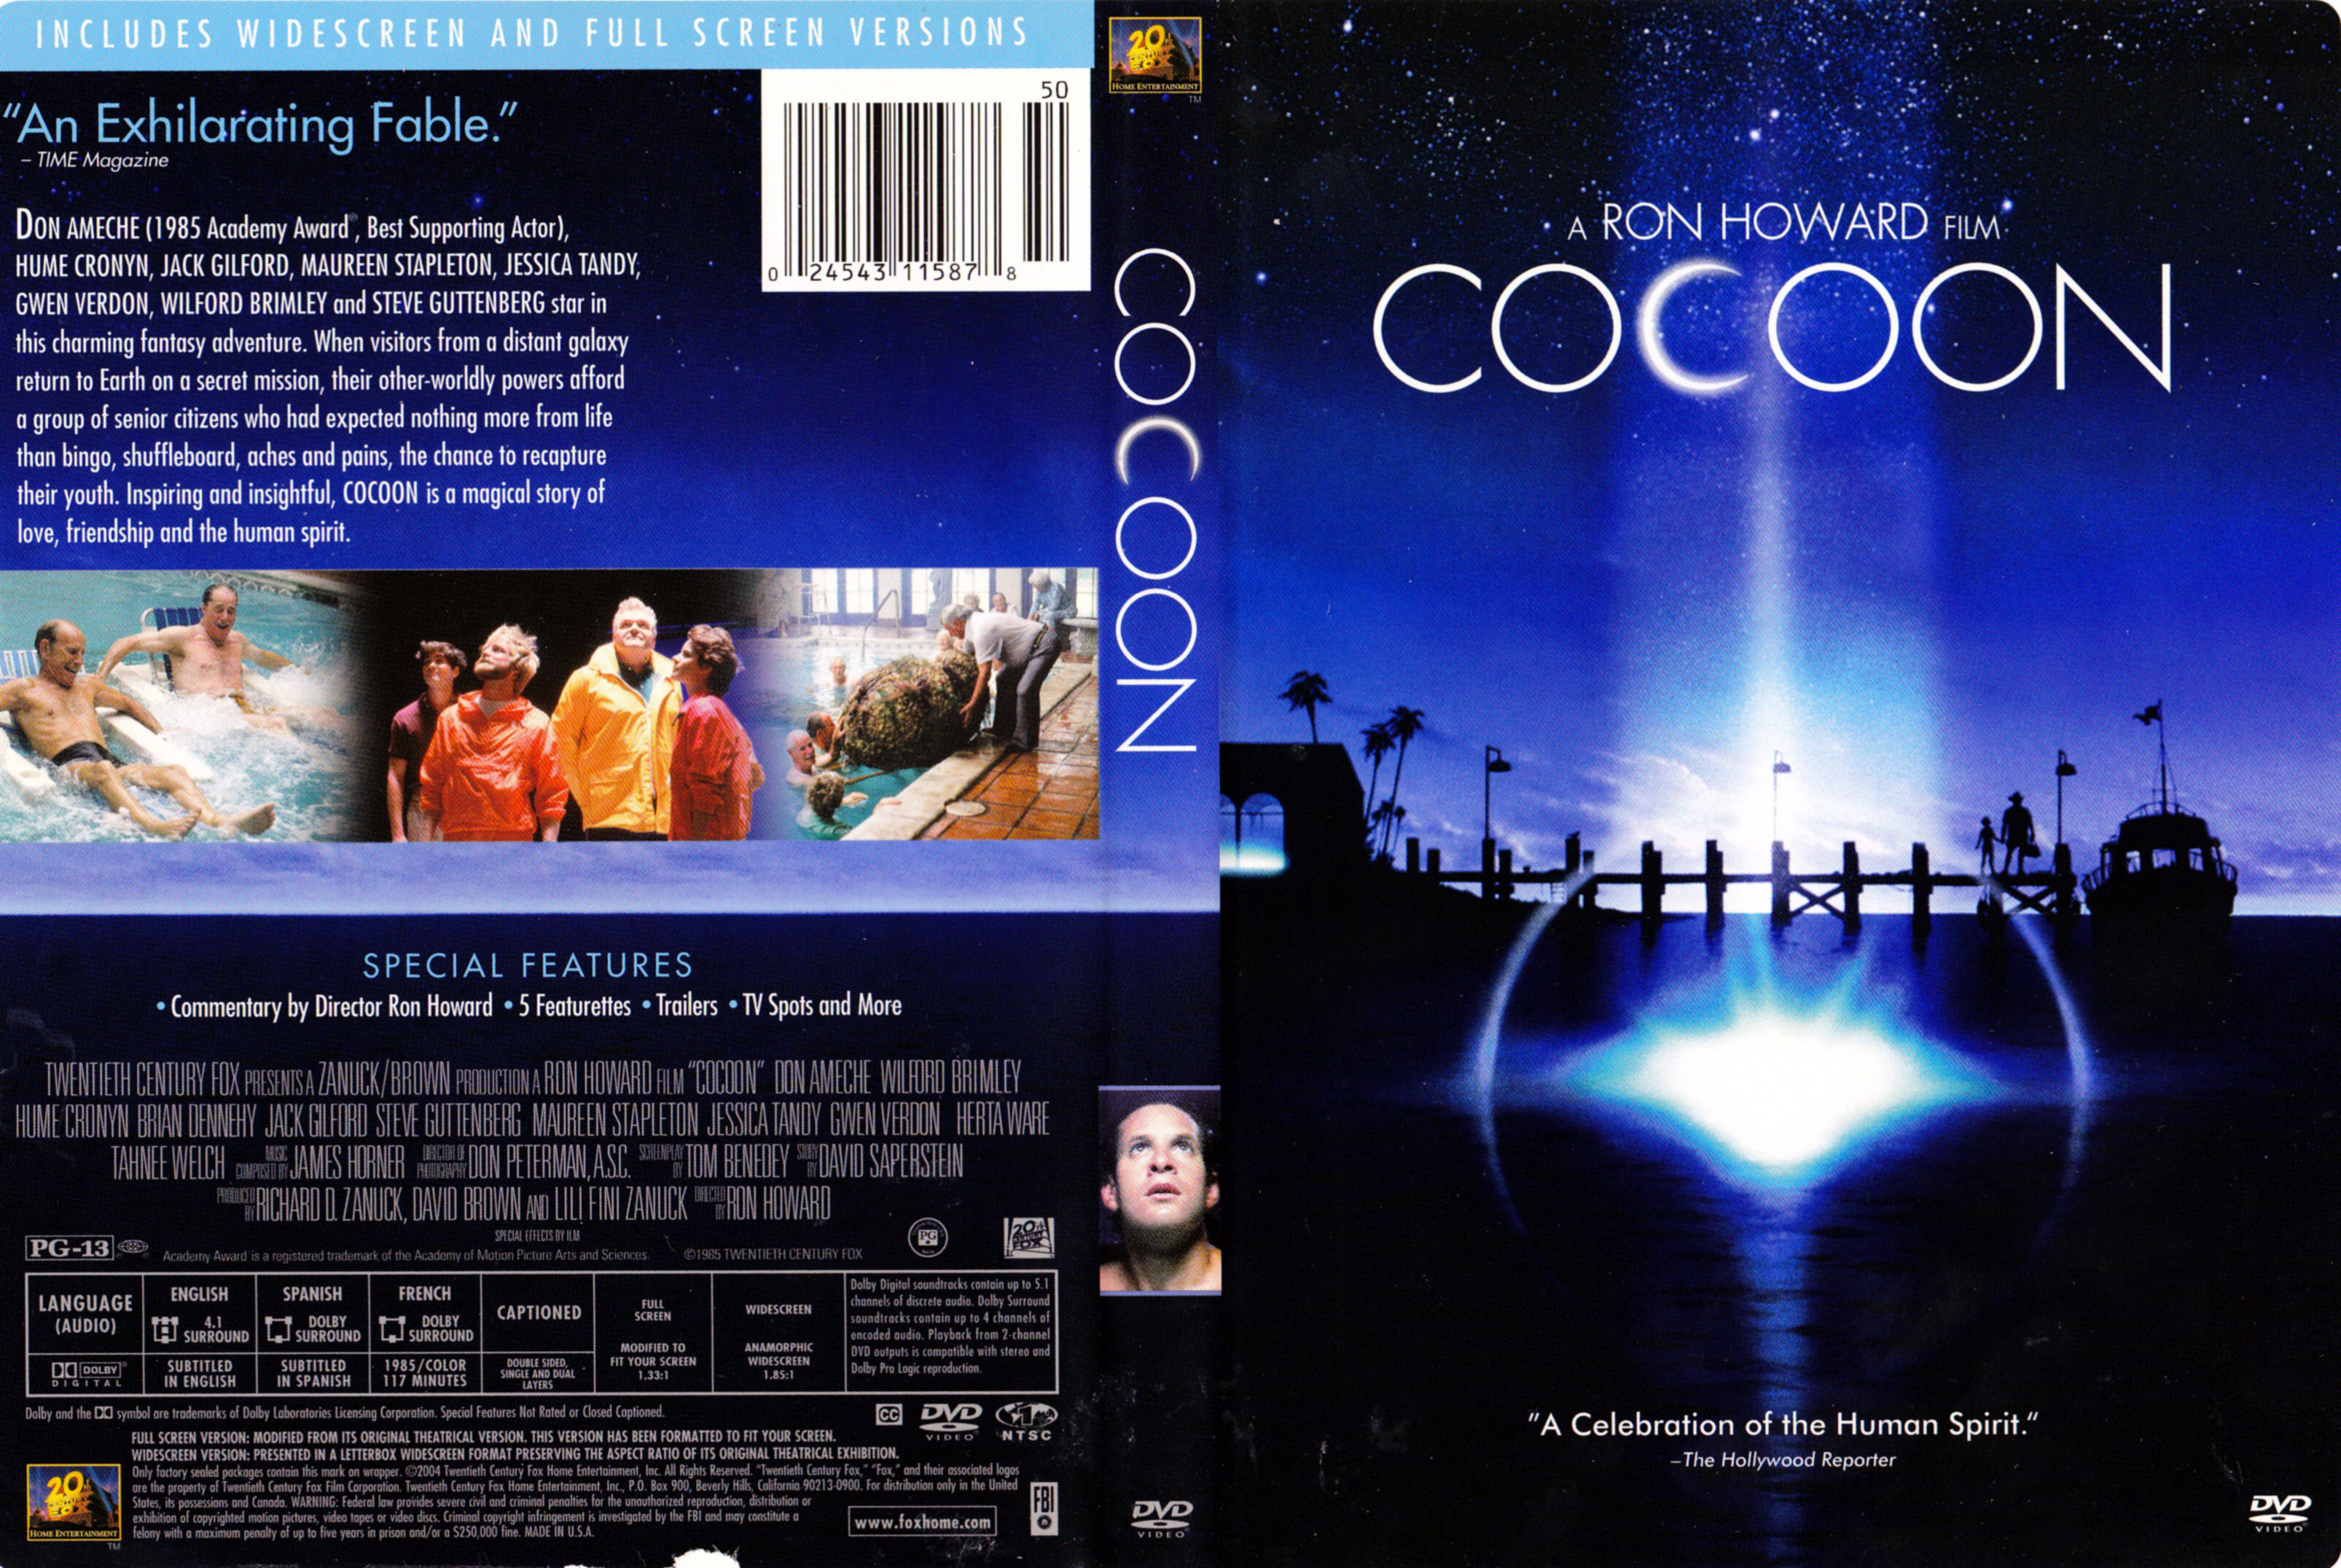 Jaquette DVD Cocoon (Canadienne)